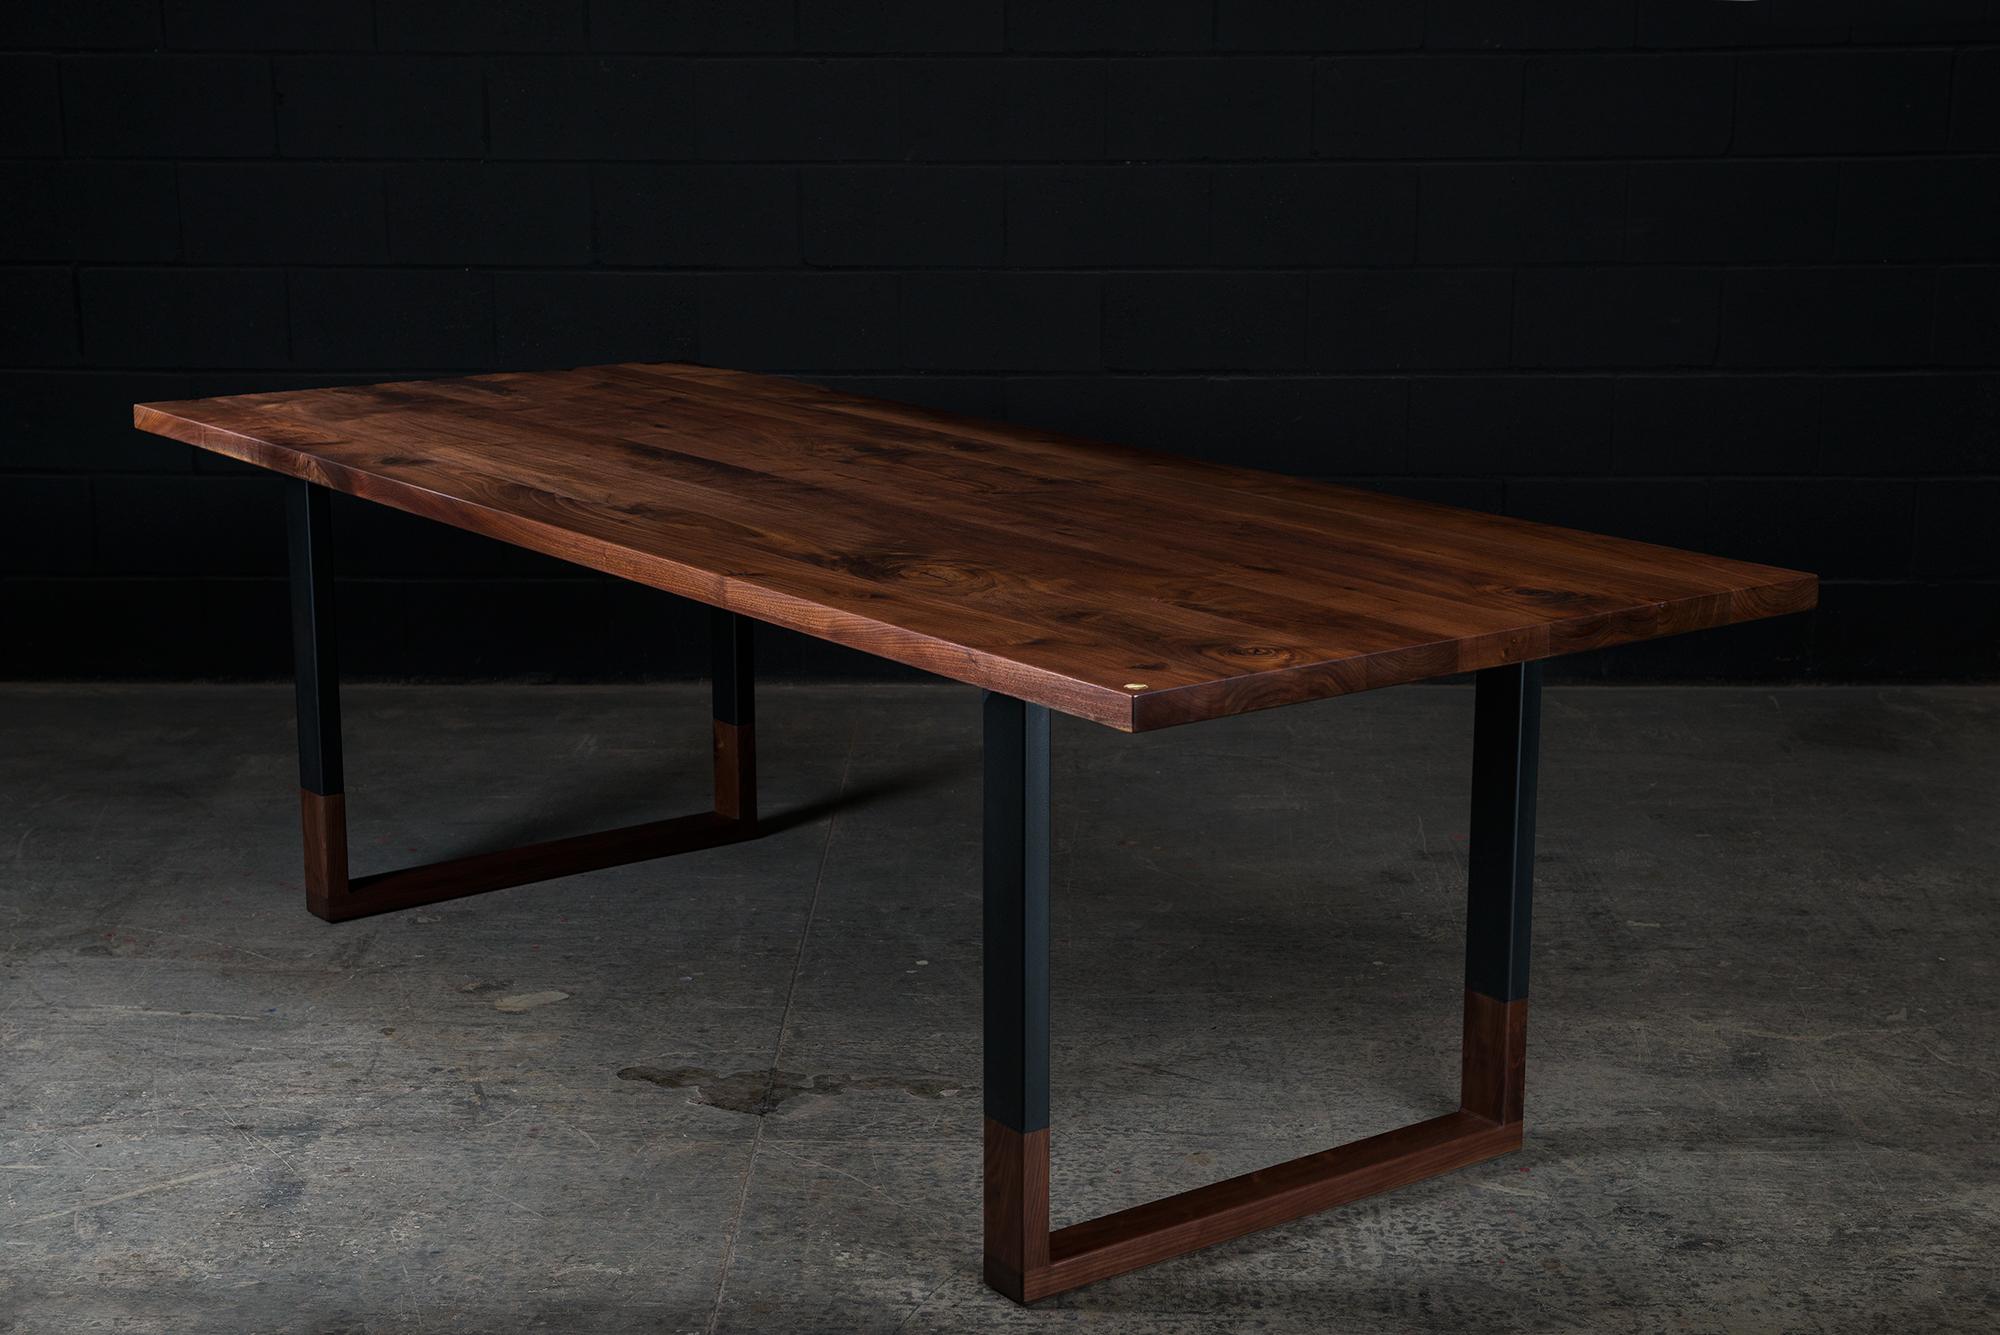 Canadian Richmond Dining Table, by Ambrozia, Solid Walnut & Black Steel, '84L' For Sale